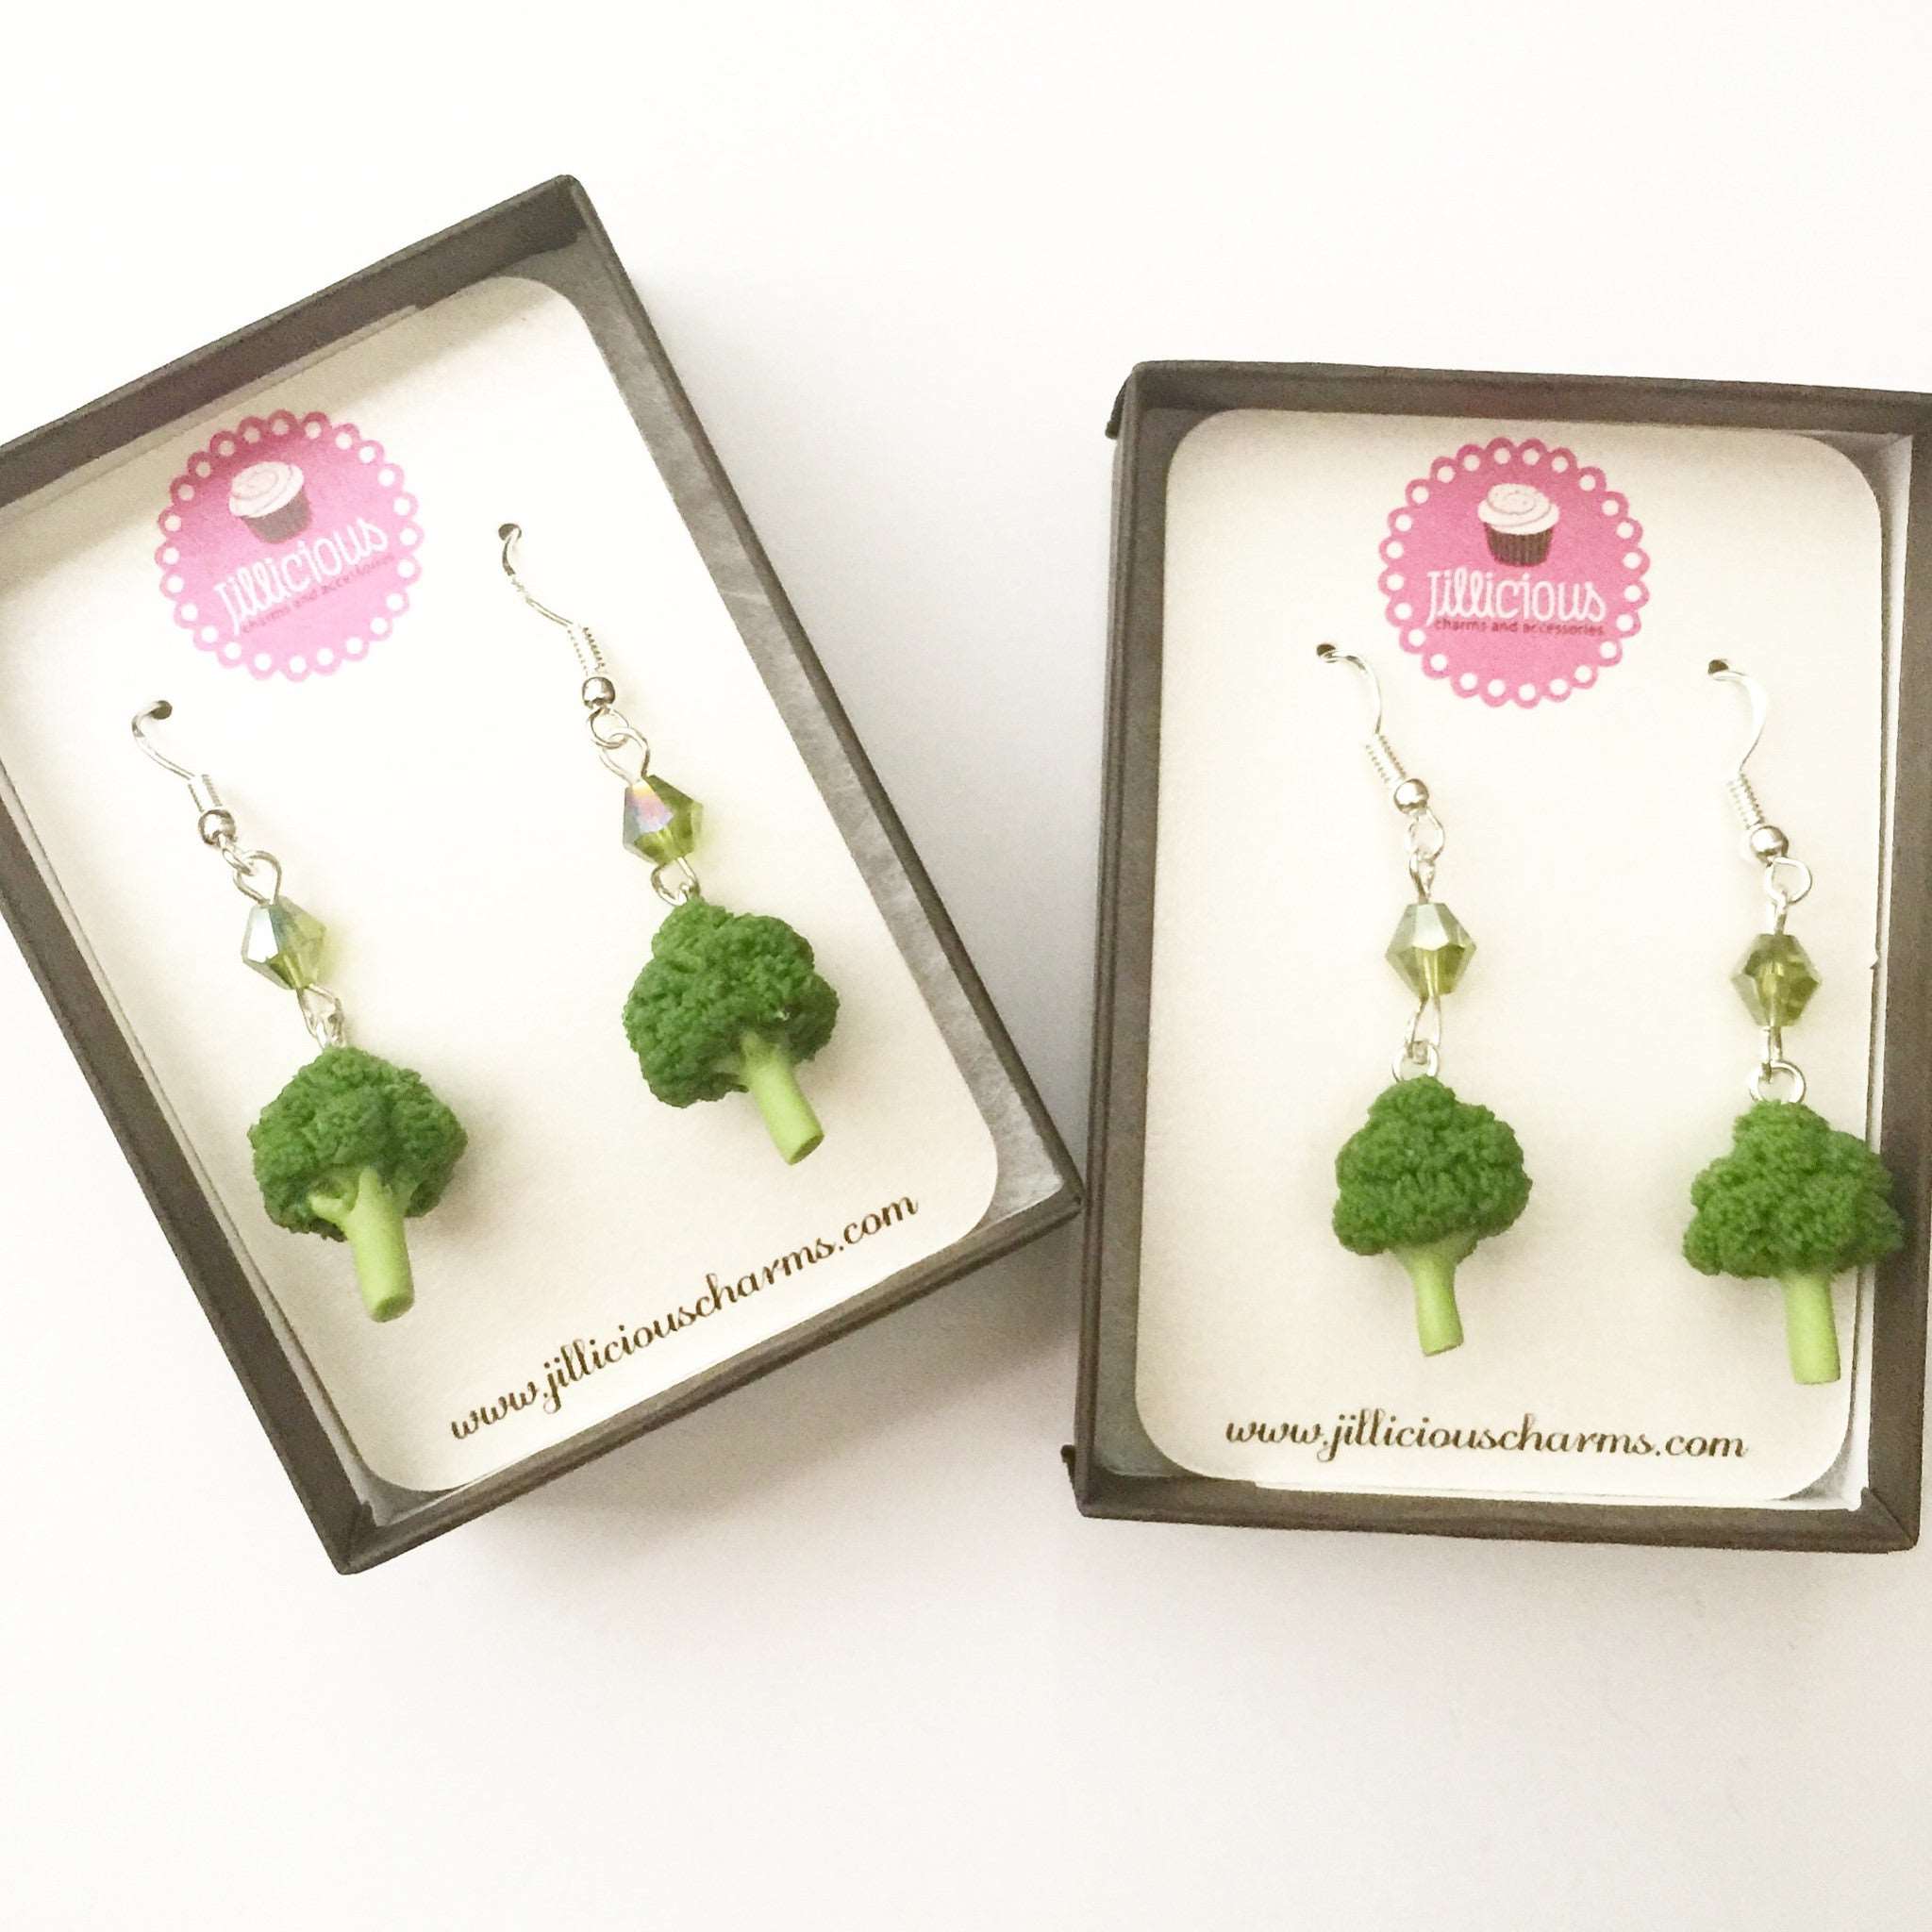 Broccoli Dangle Earrings - Jillicious charms and accessories